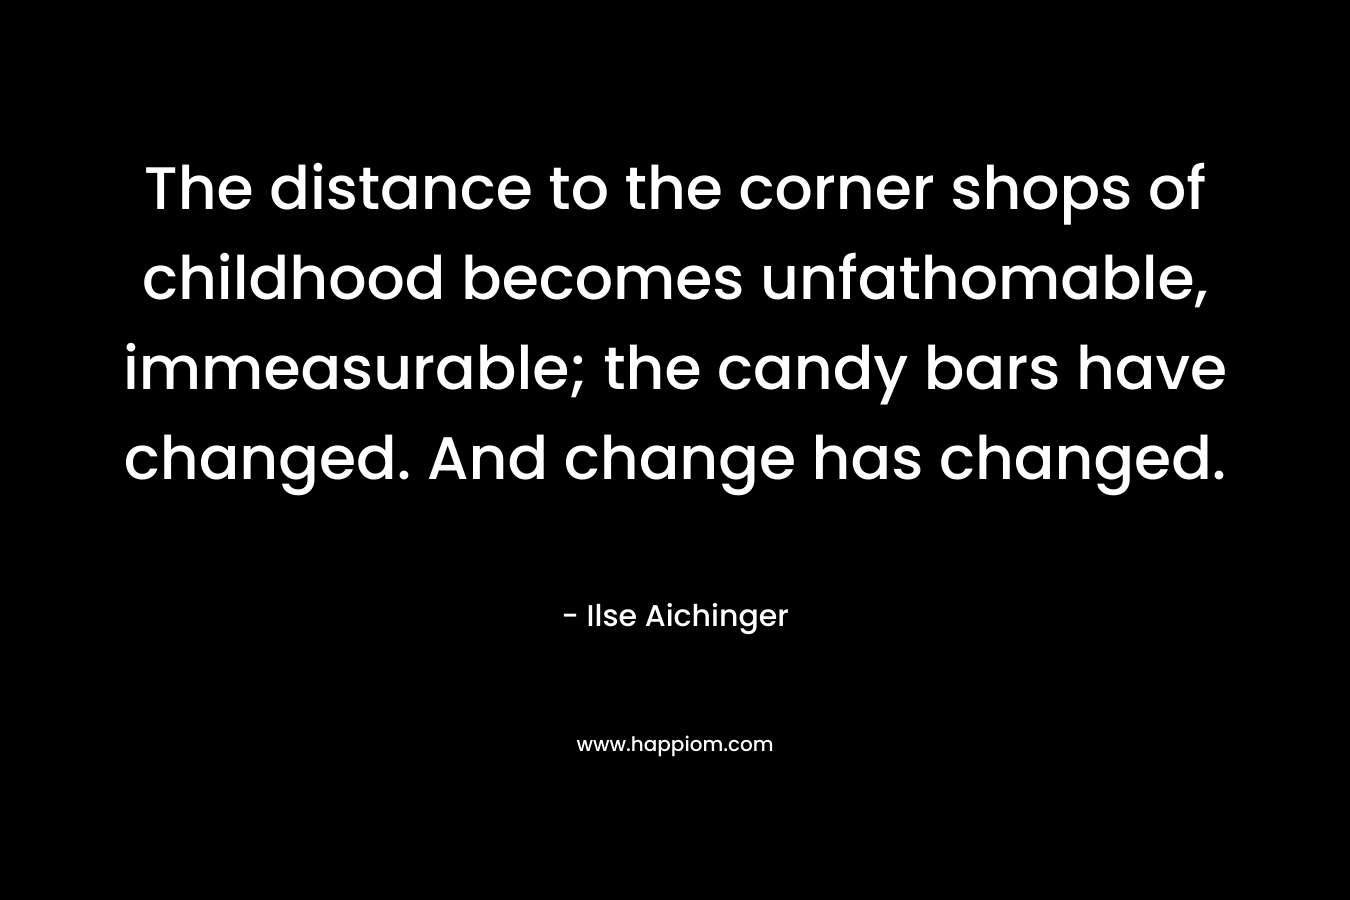 The distance to the corner shops of childhood becomes unfathomable, immeasurable; the candy bars have changed. And change has changed. – Ilse Aichinger